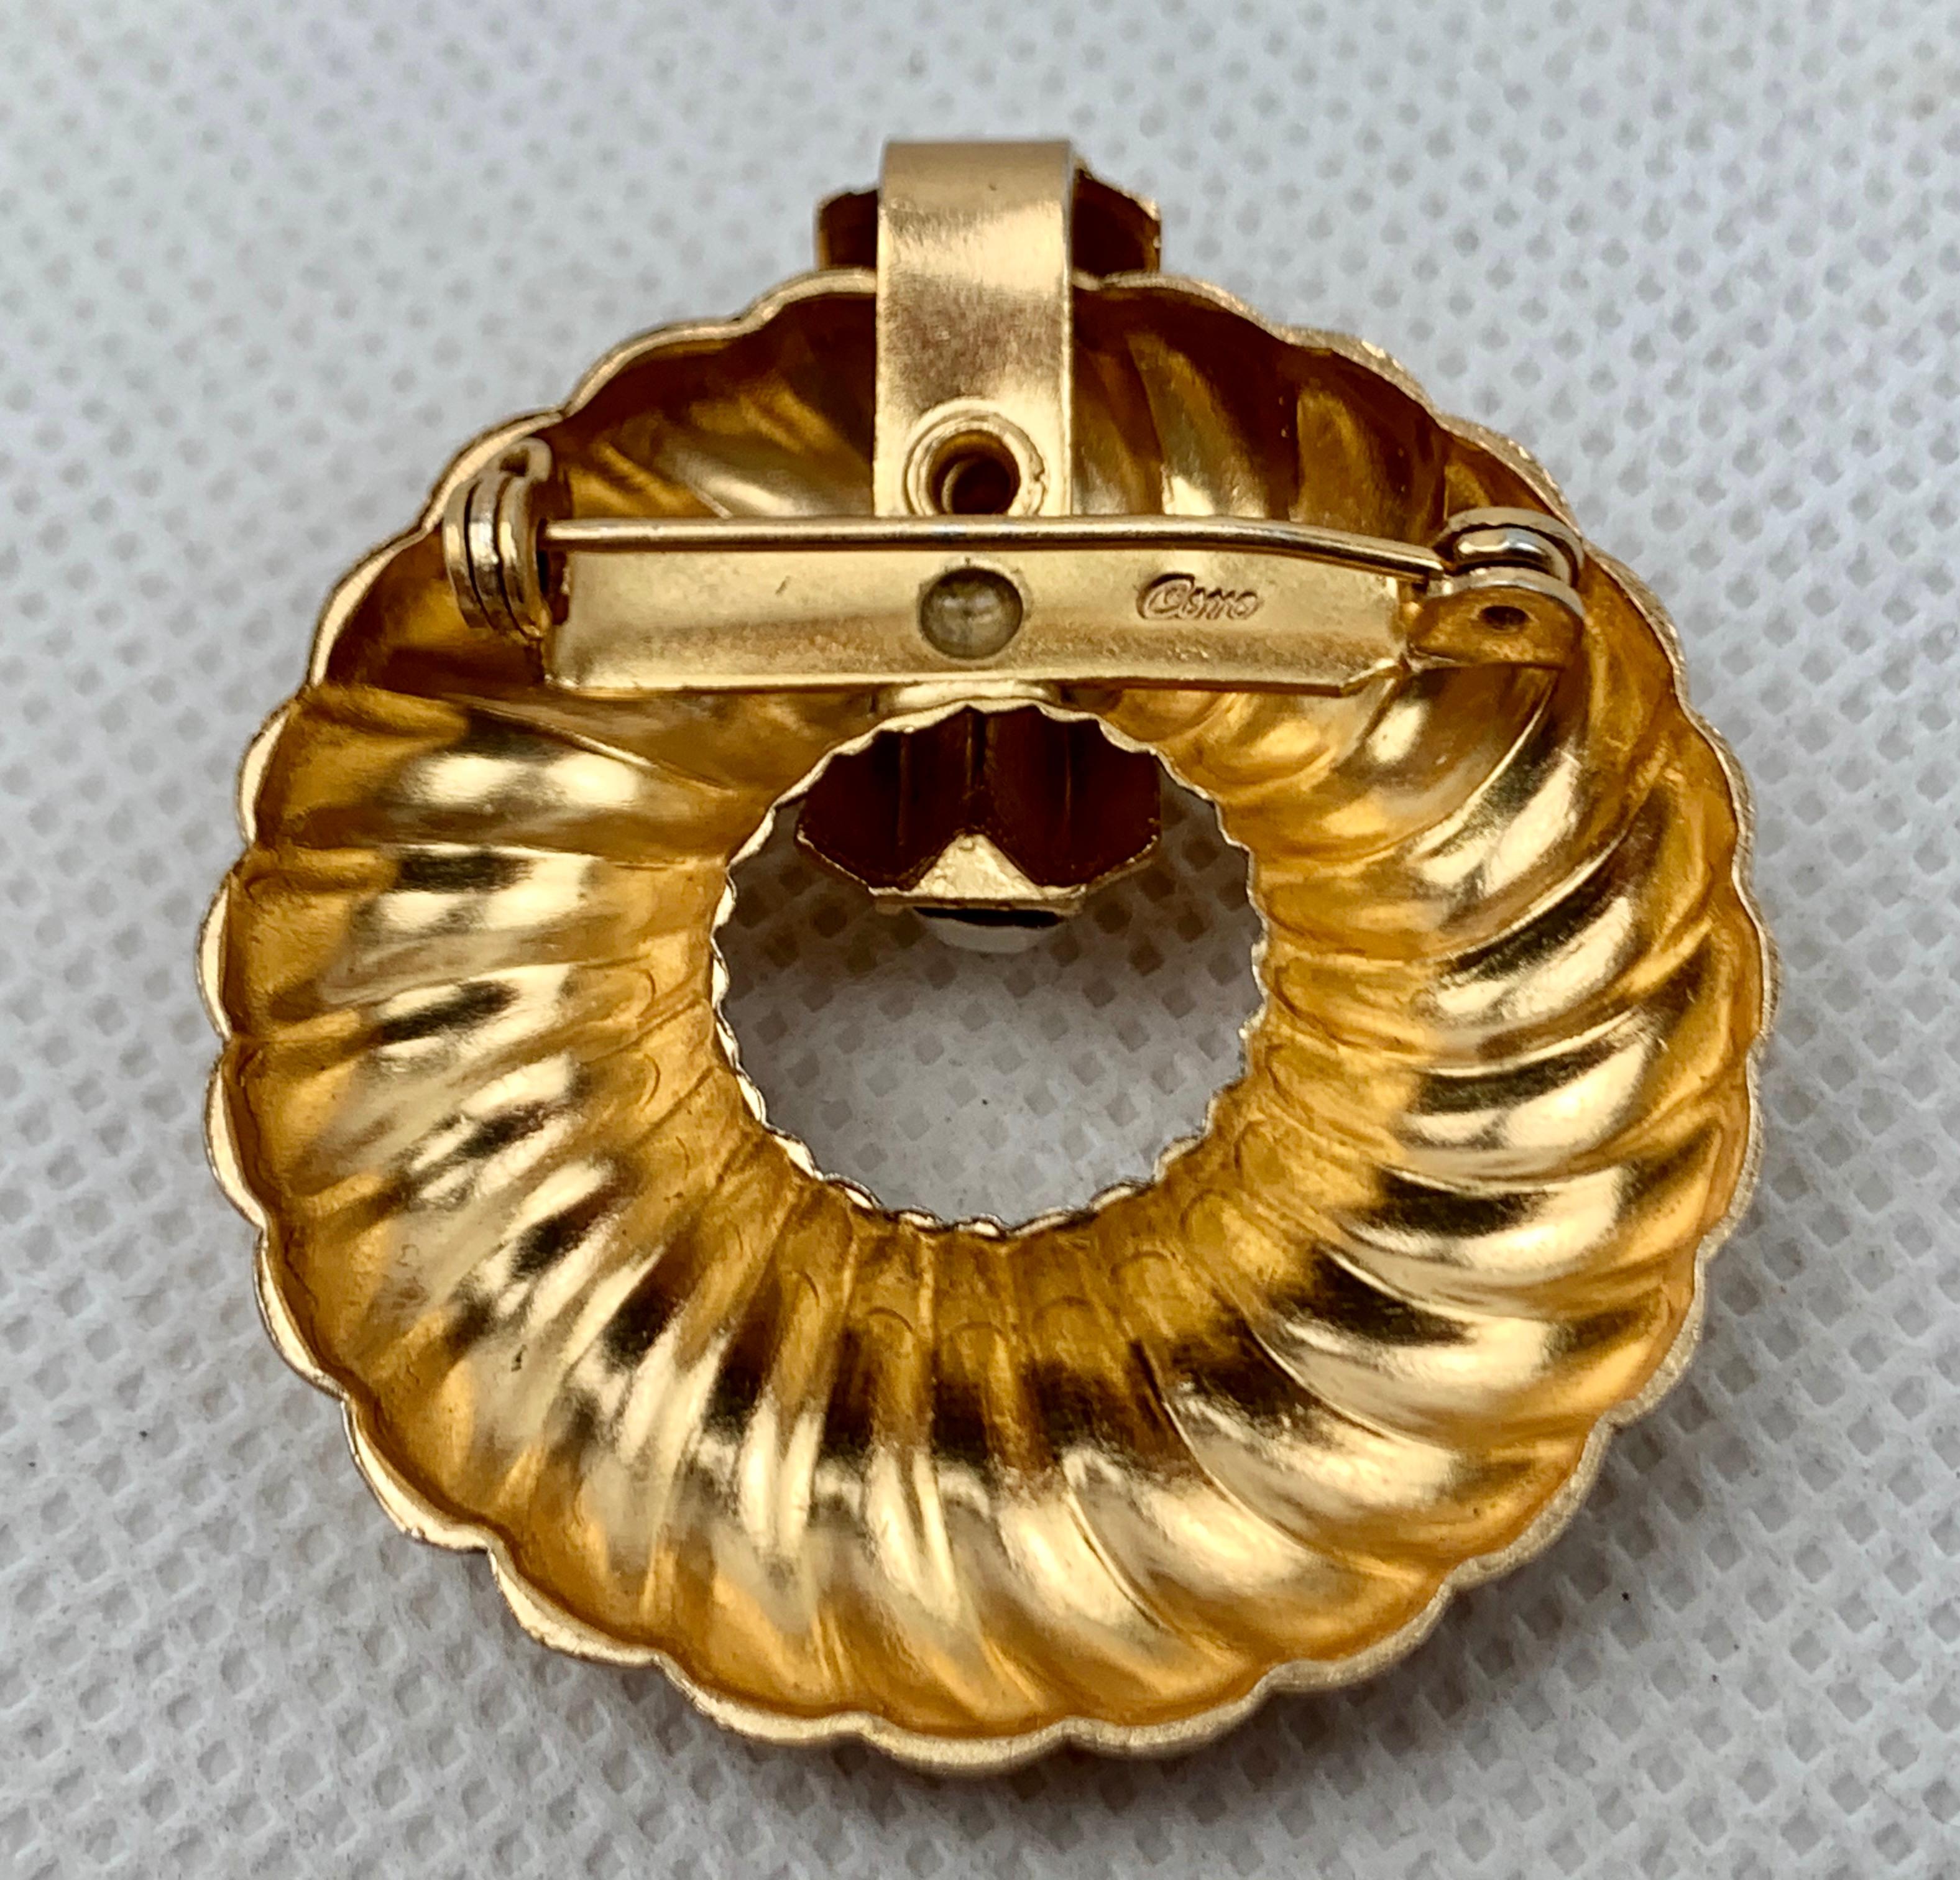 Art Deco Shrimp Style Gold Filled Brooch by CORO, circa 1940s